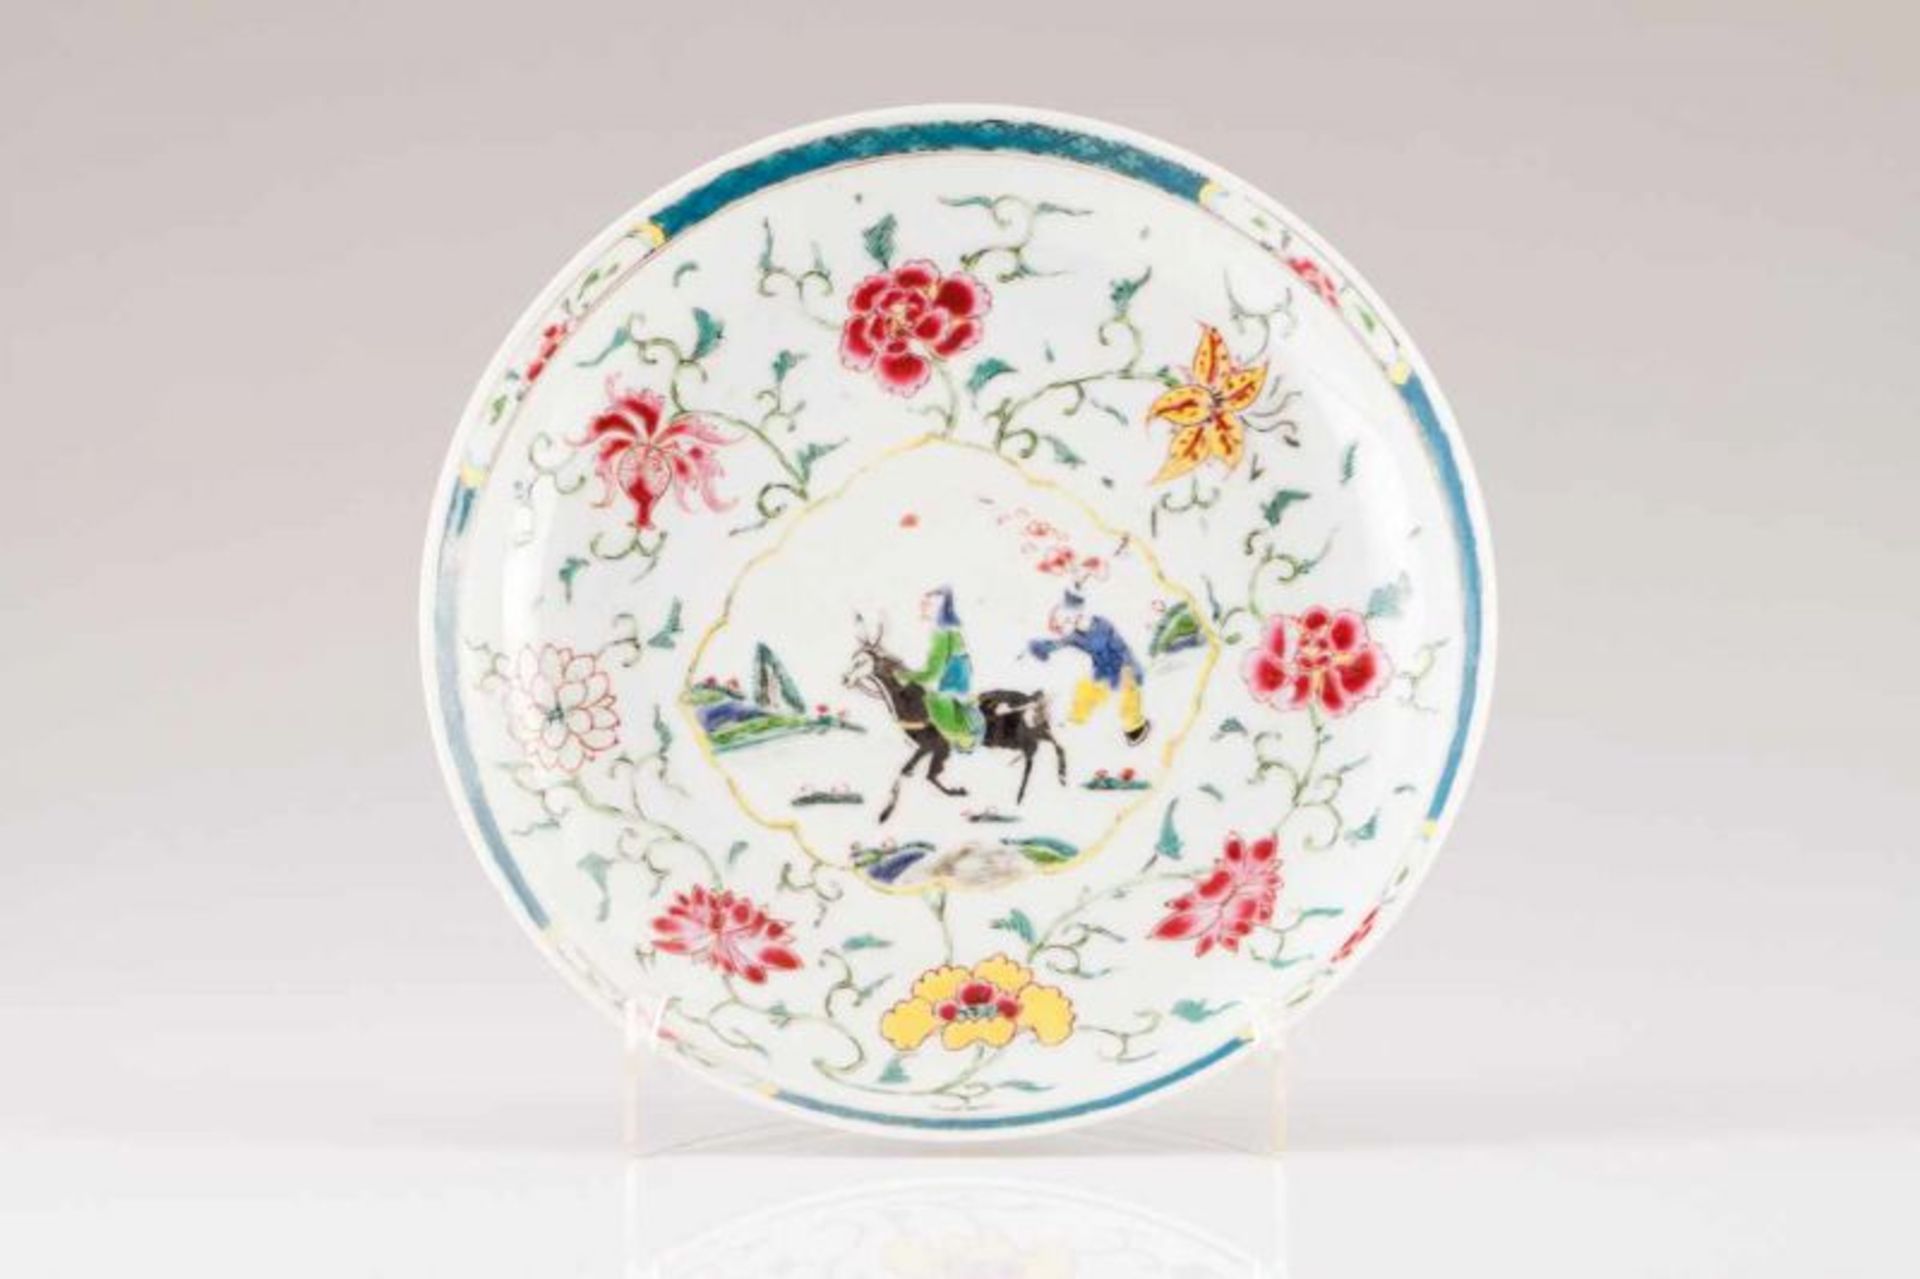 A saucer Chinese export porcelain Polychrome decoration depicting flowers and, at the centre,